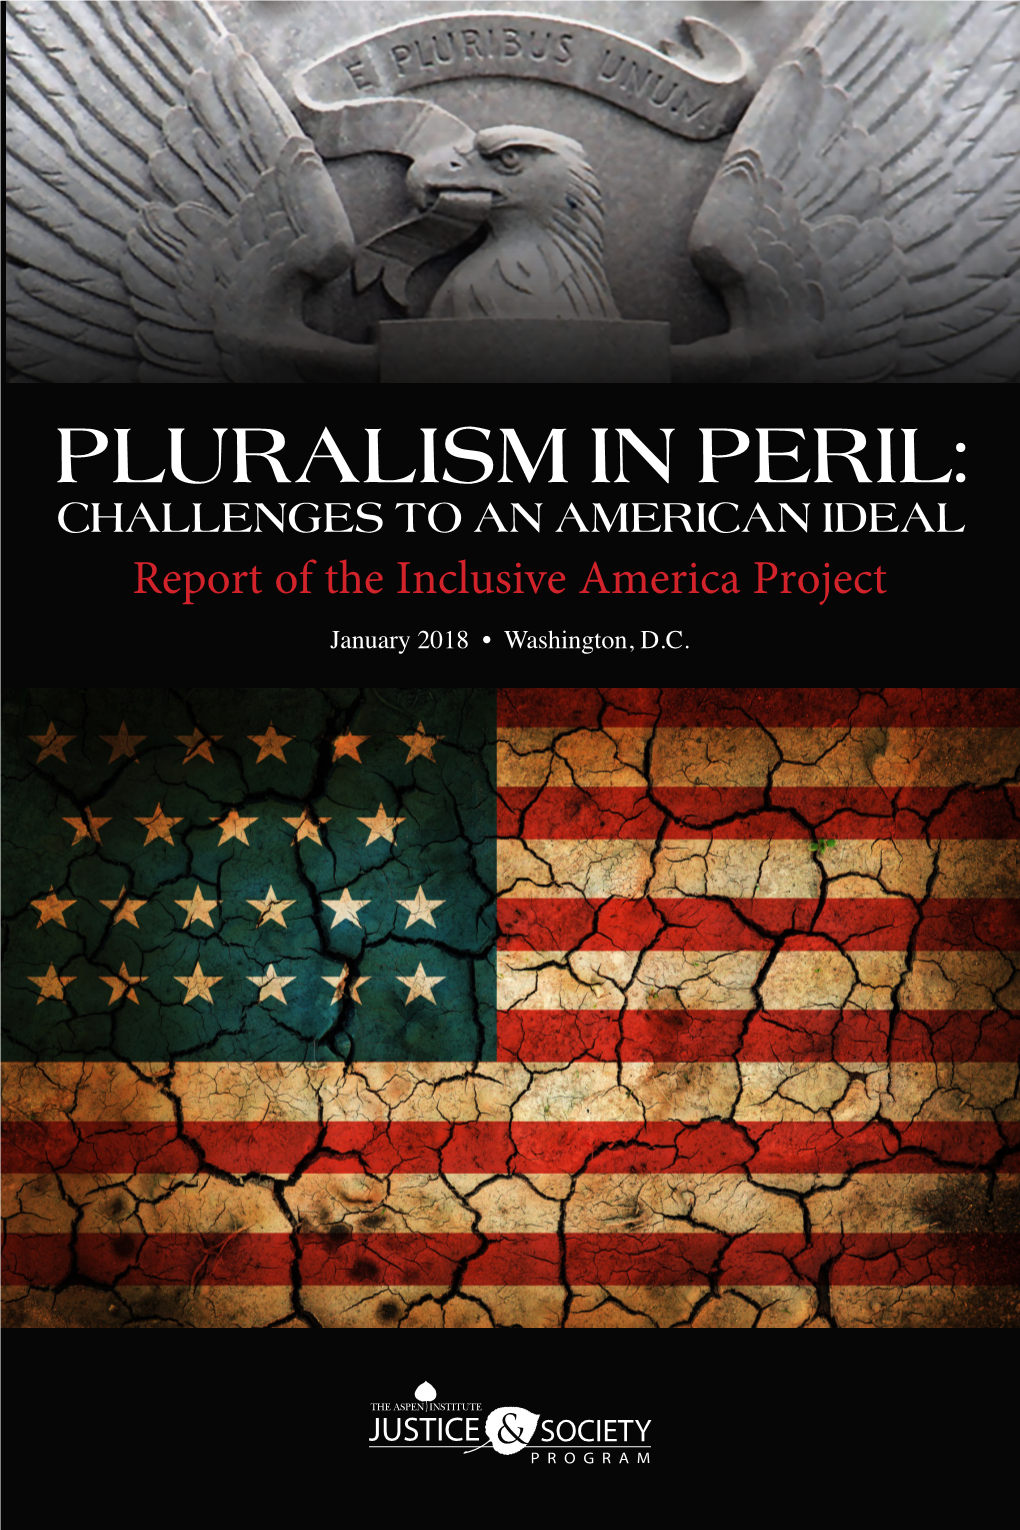 Pluralism in Peril: Challenges to an American Ideal